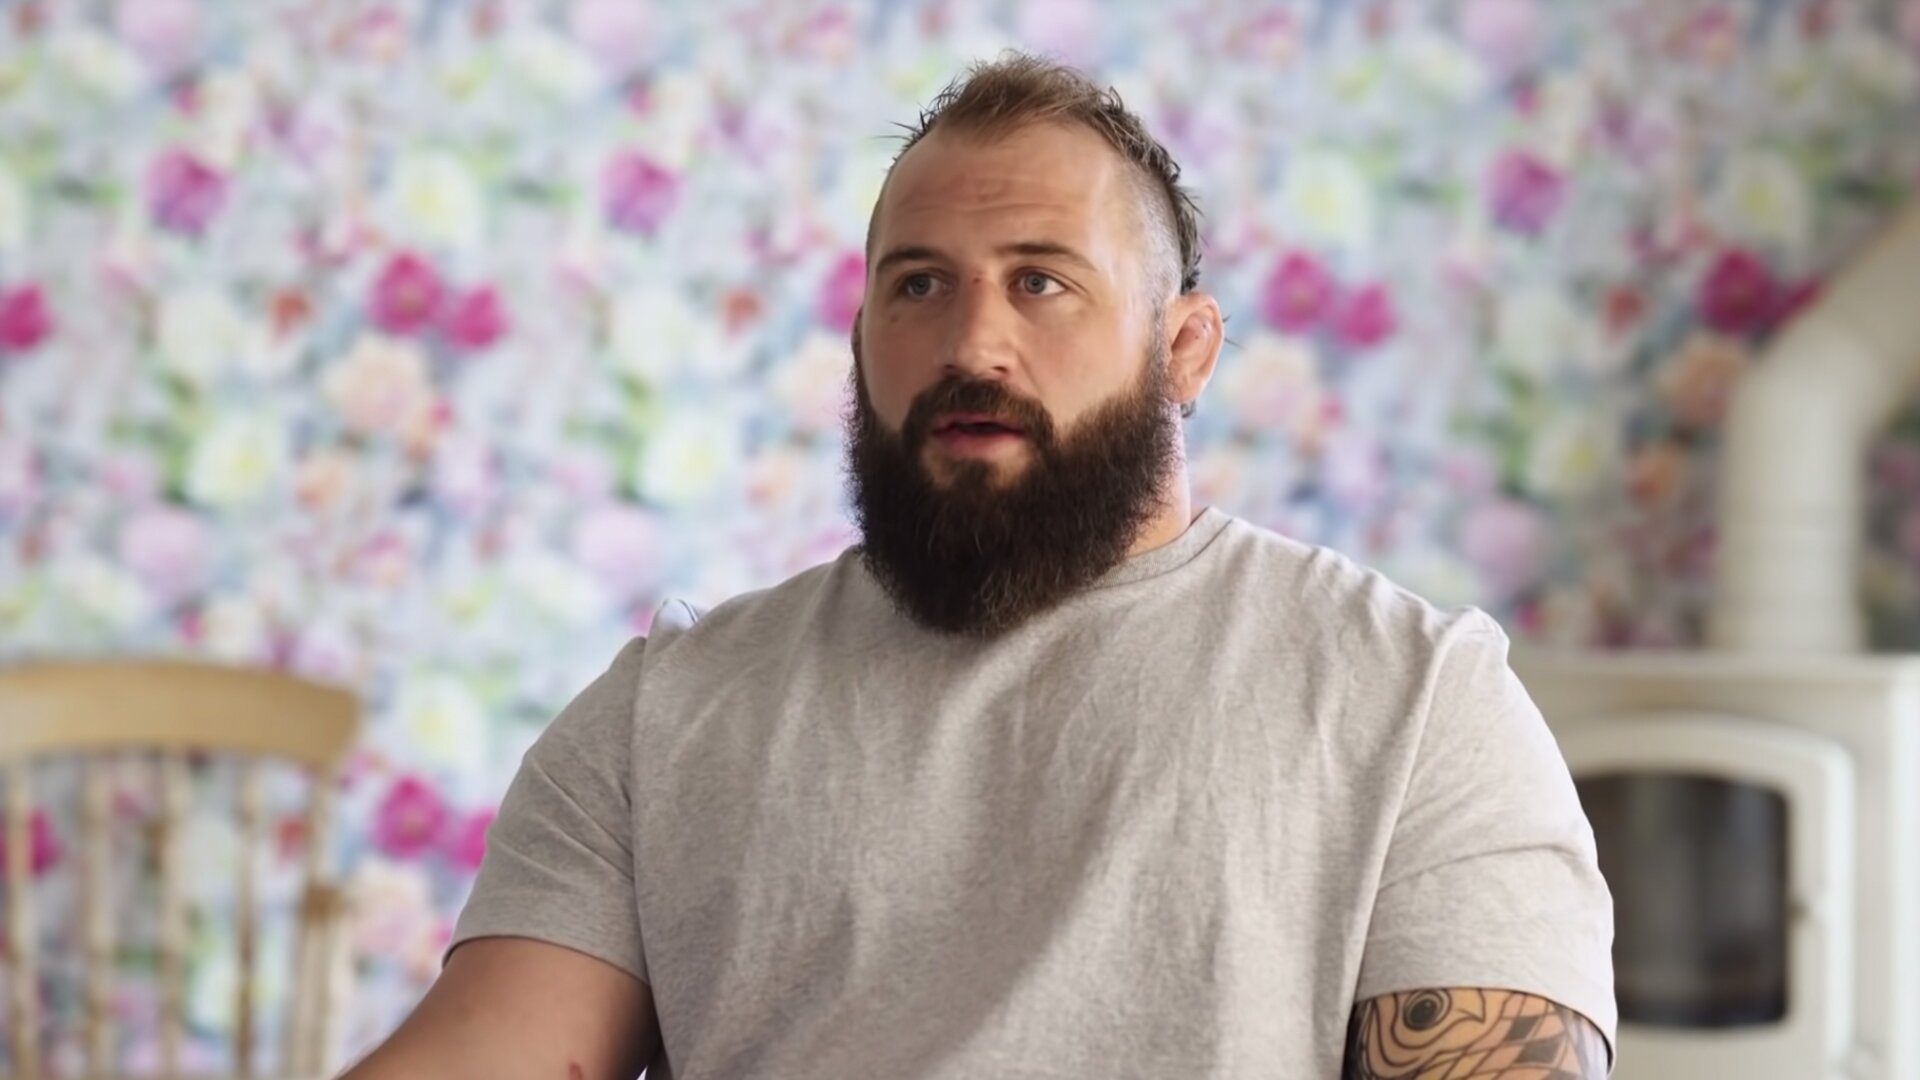 "I was crying on my way to work" - Incredible Joe Marler video as he speaks openly about struggles